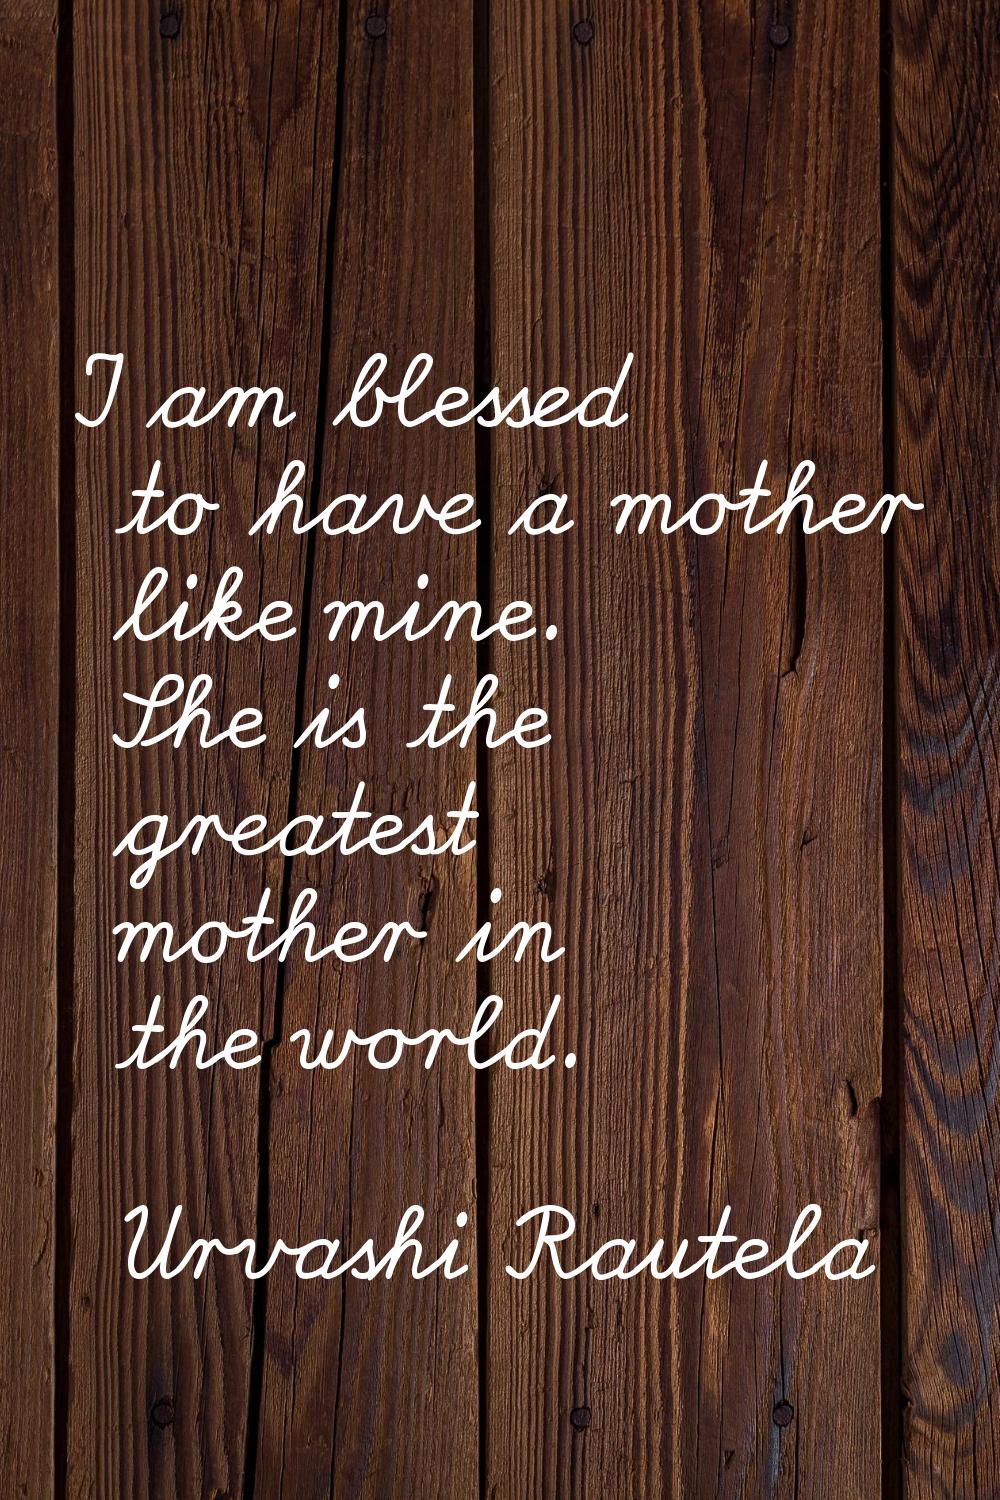 I am blessed to have a mother like mine. She is the greatest mother in the world.